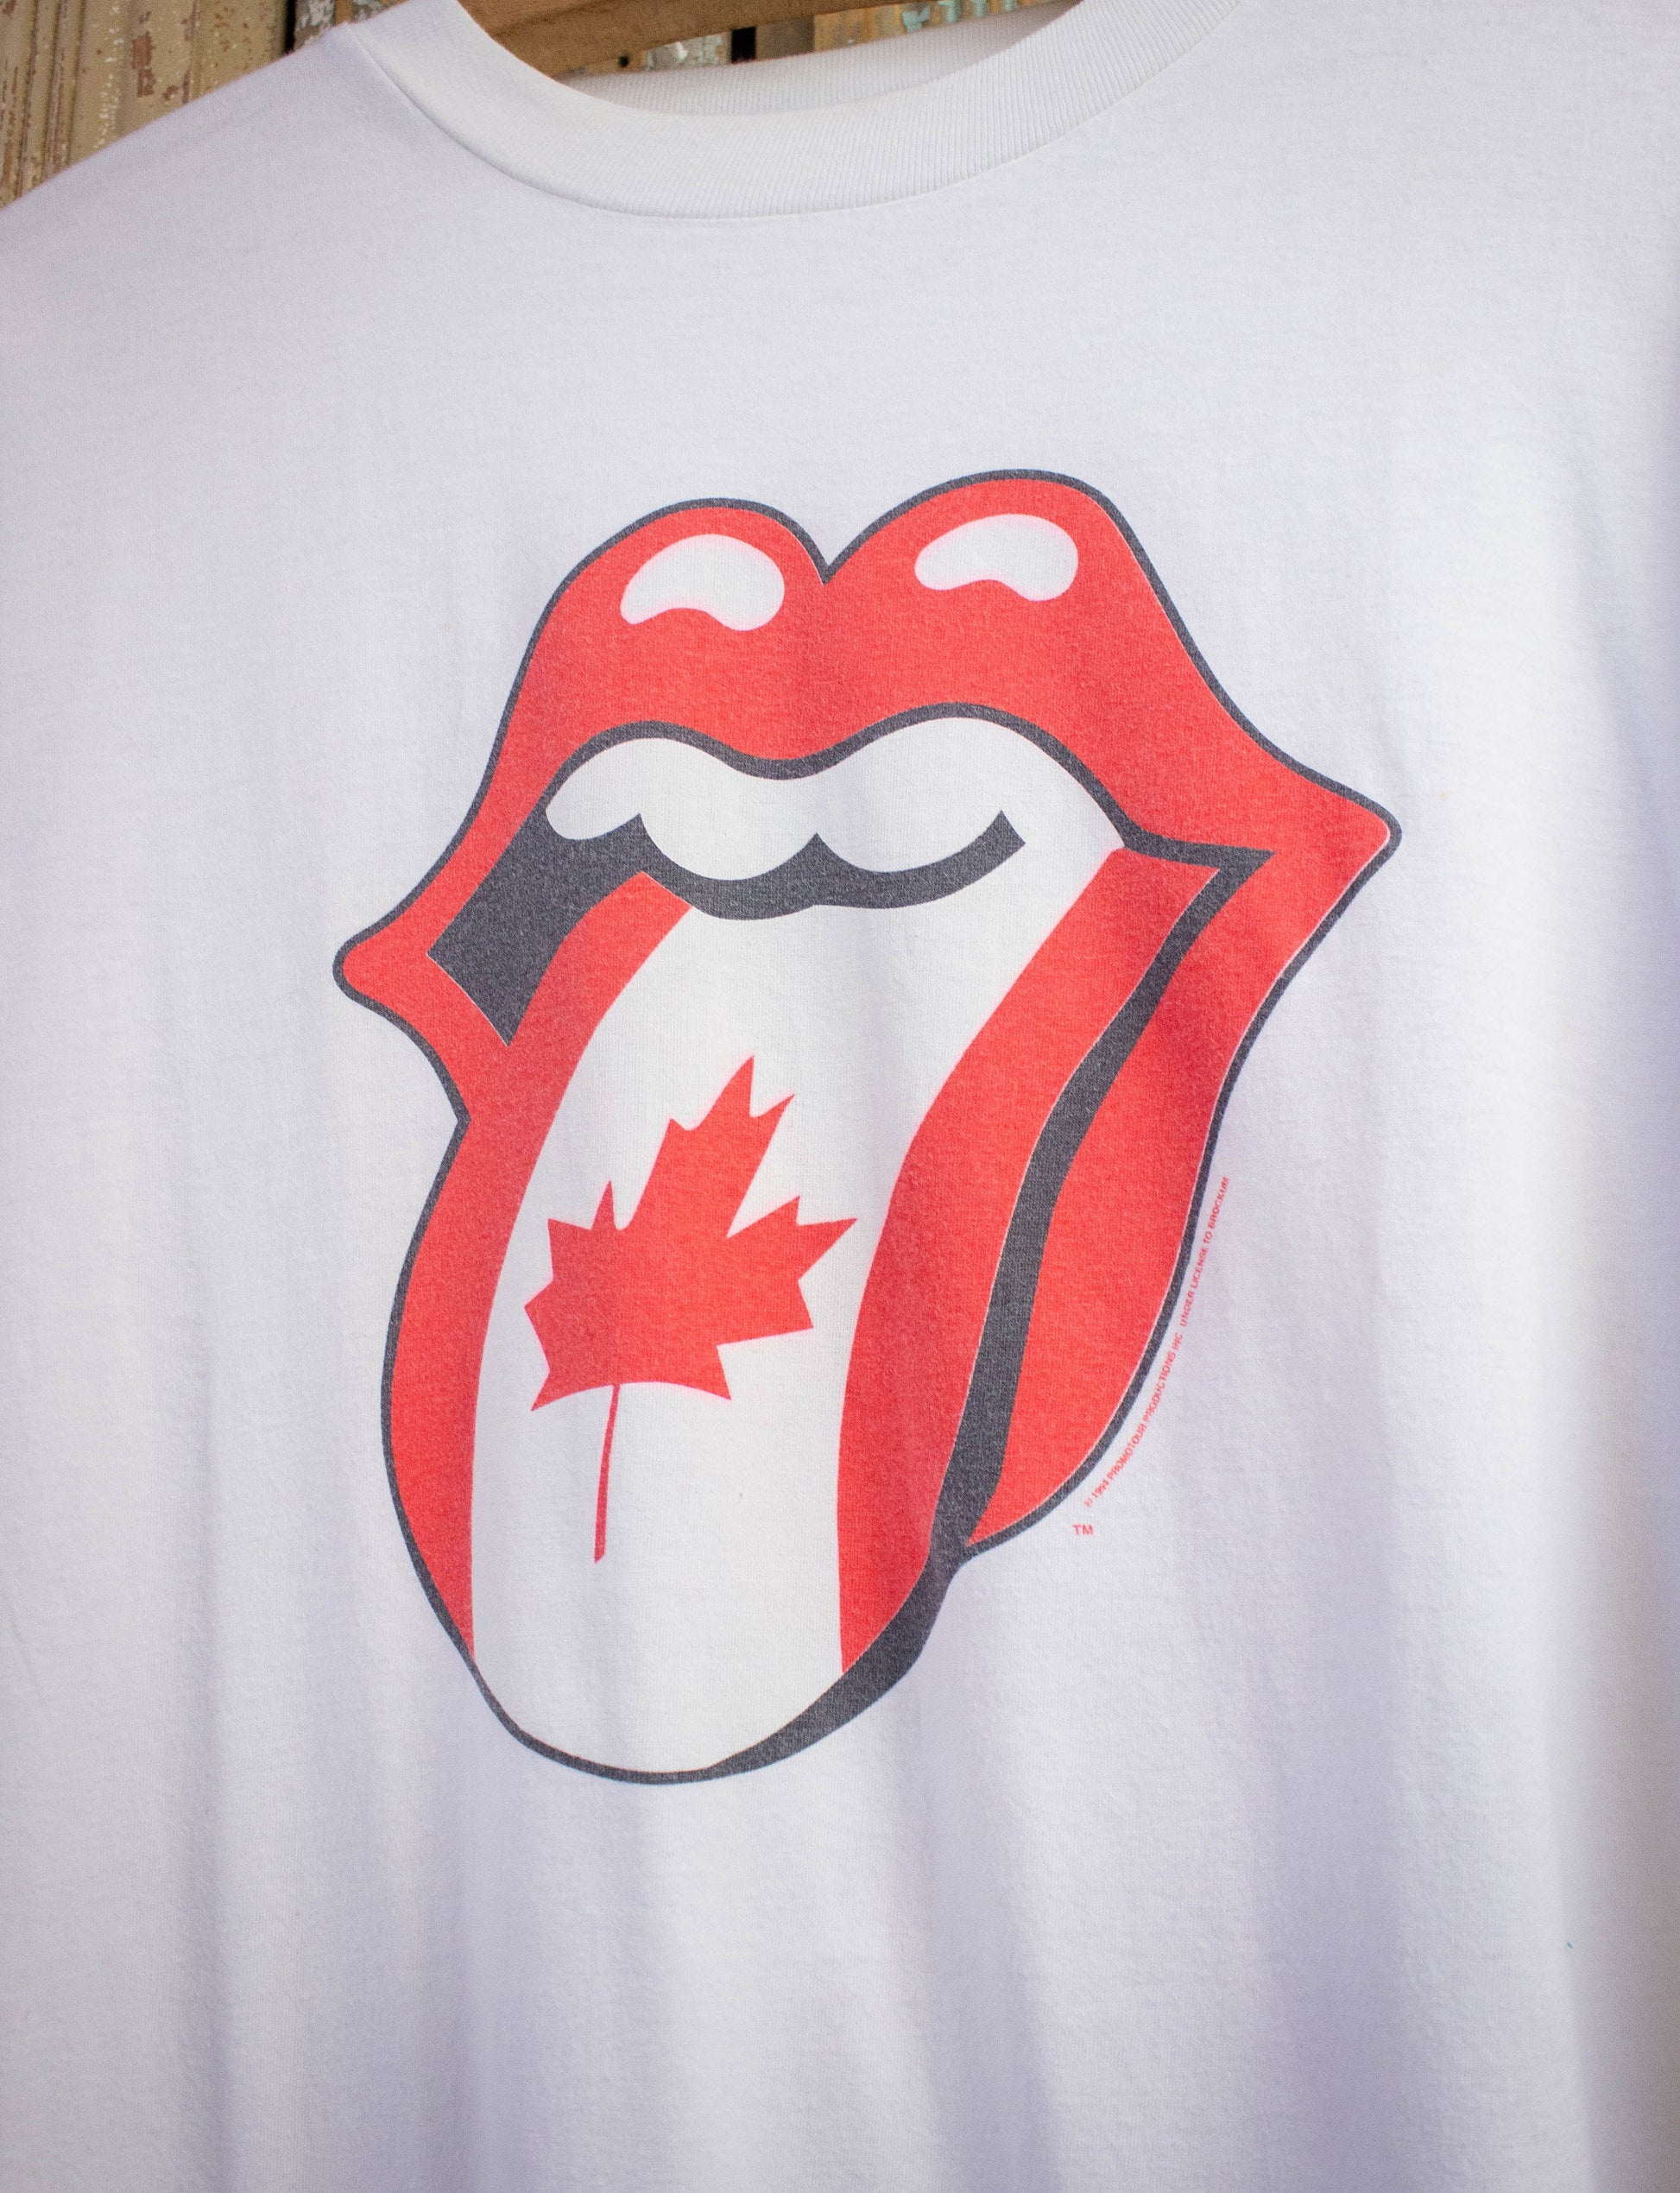 Vintage Rolling Stones Voodoo Lounge Canada Concert T Shirt 1994-95 White XL